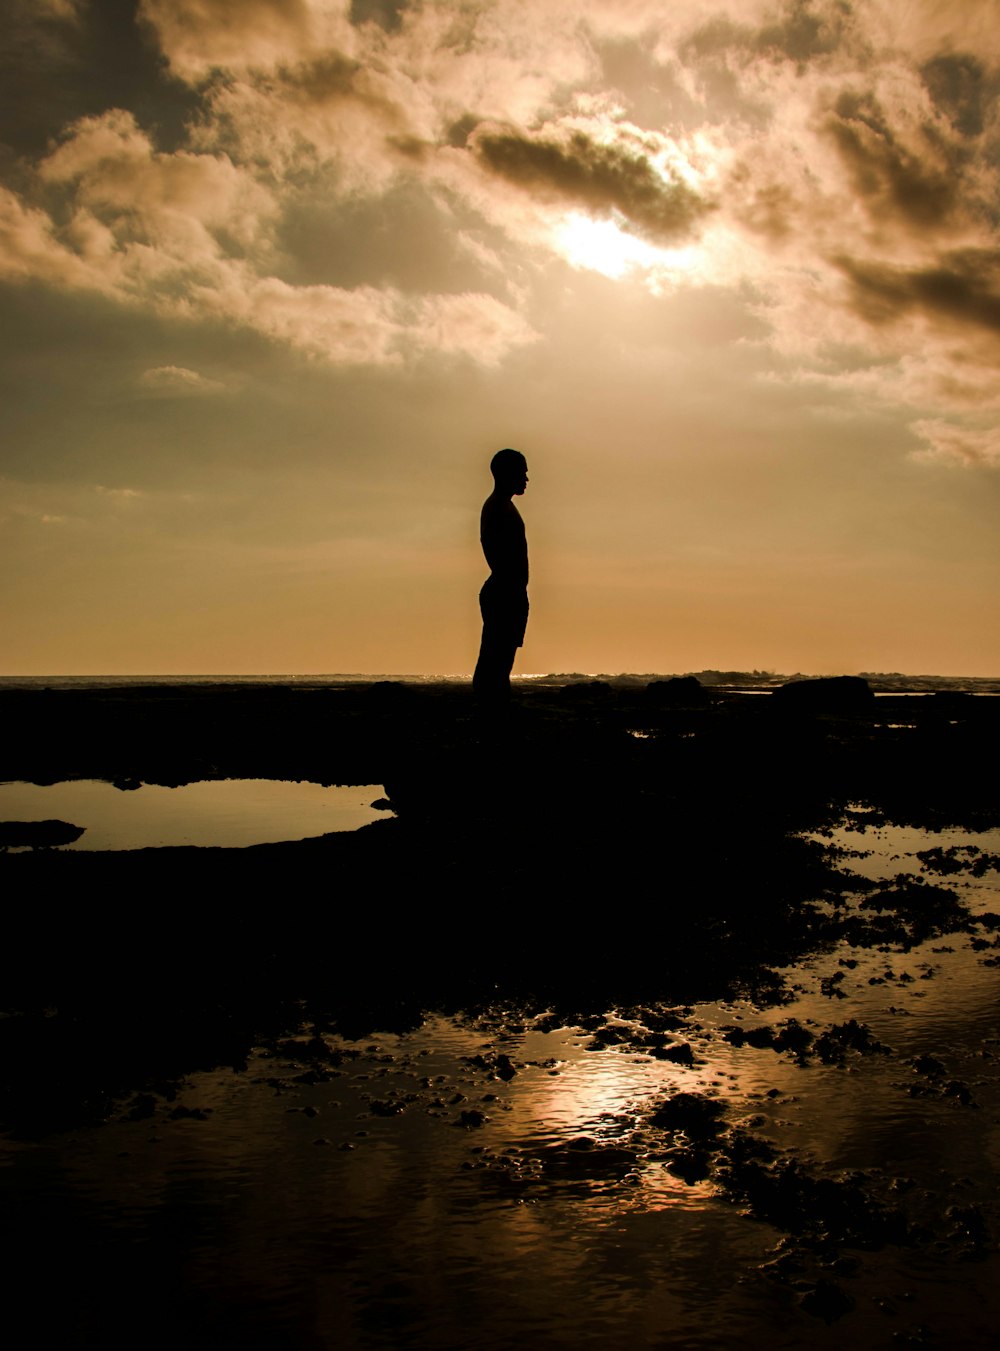 silhouette of person standing on rock